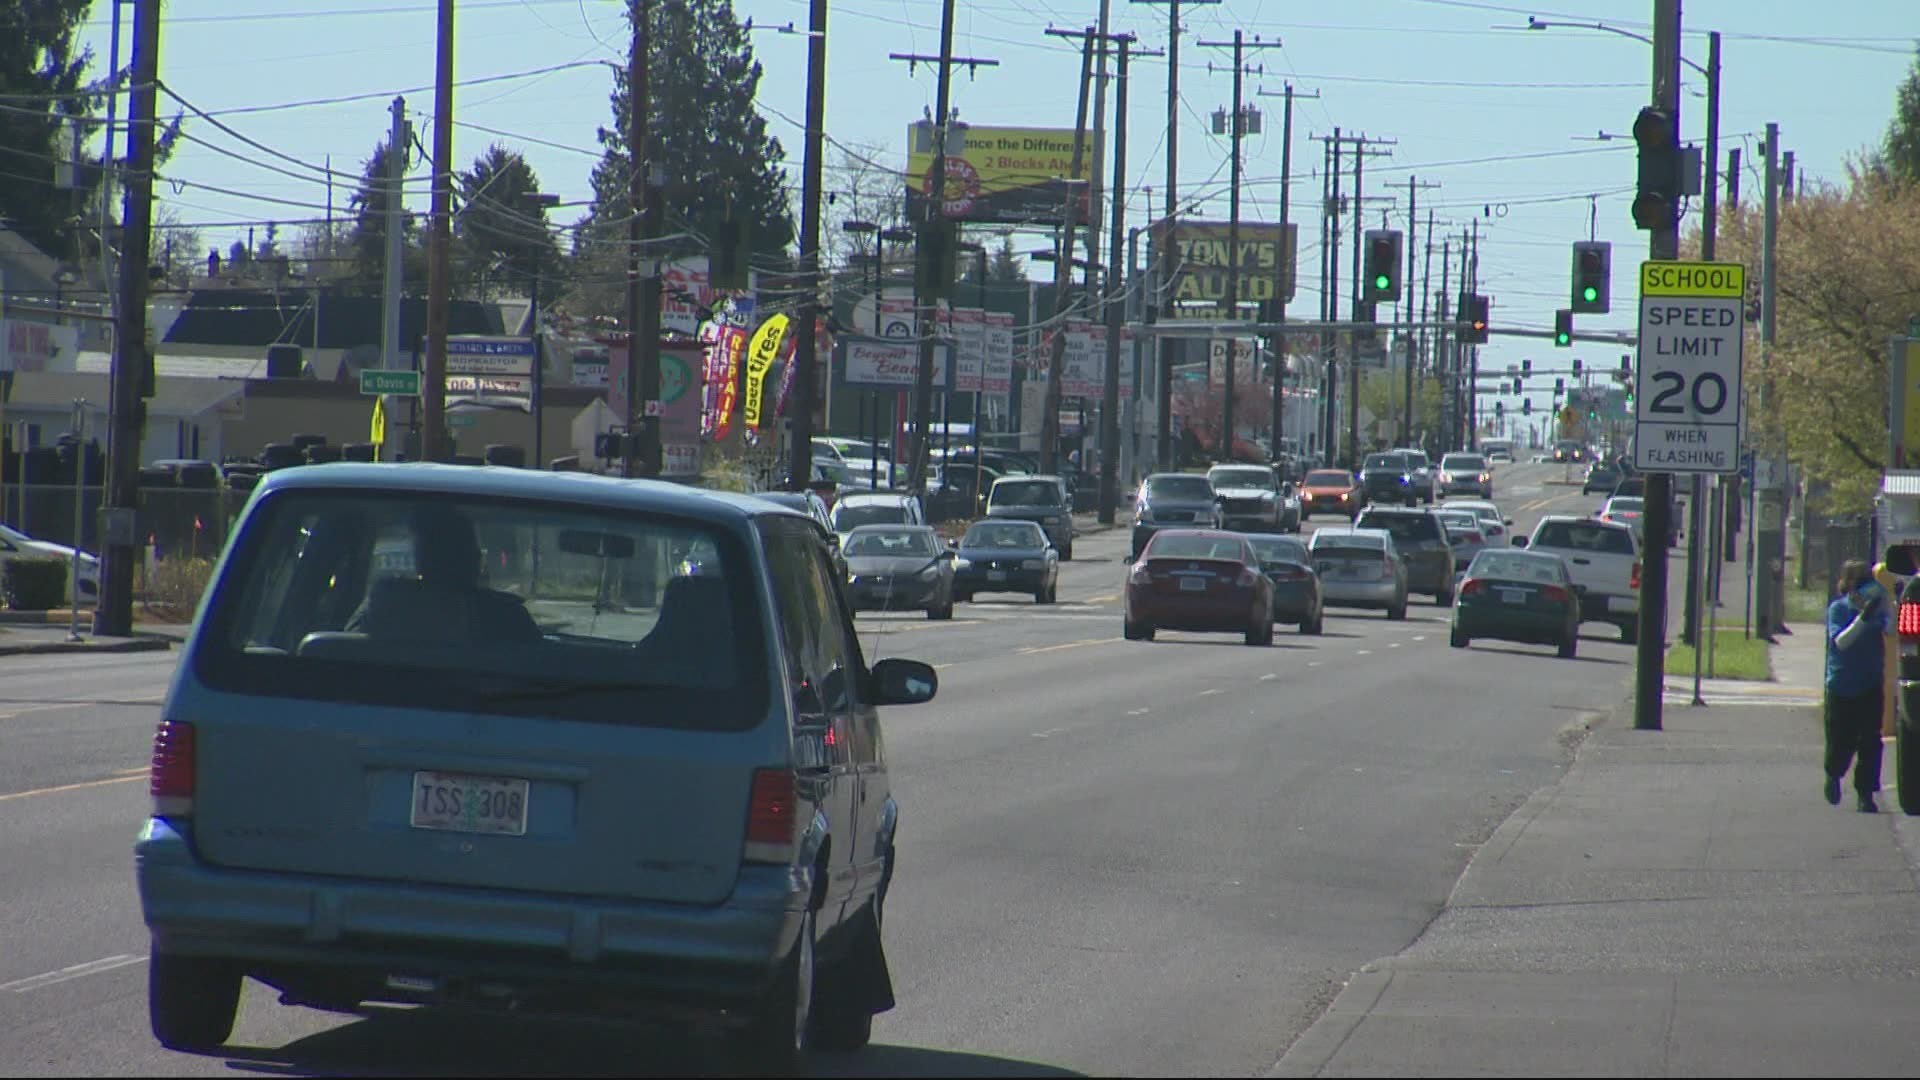 Oregon lawmakers are considering a bill that would bring state-owned "orphan highways" like 82nd Avenue under local control.